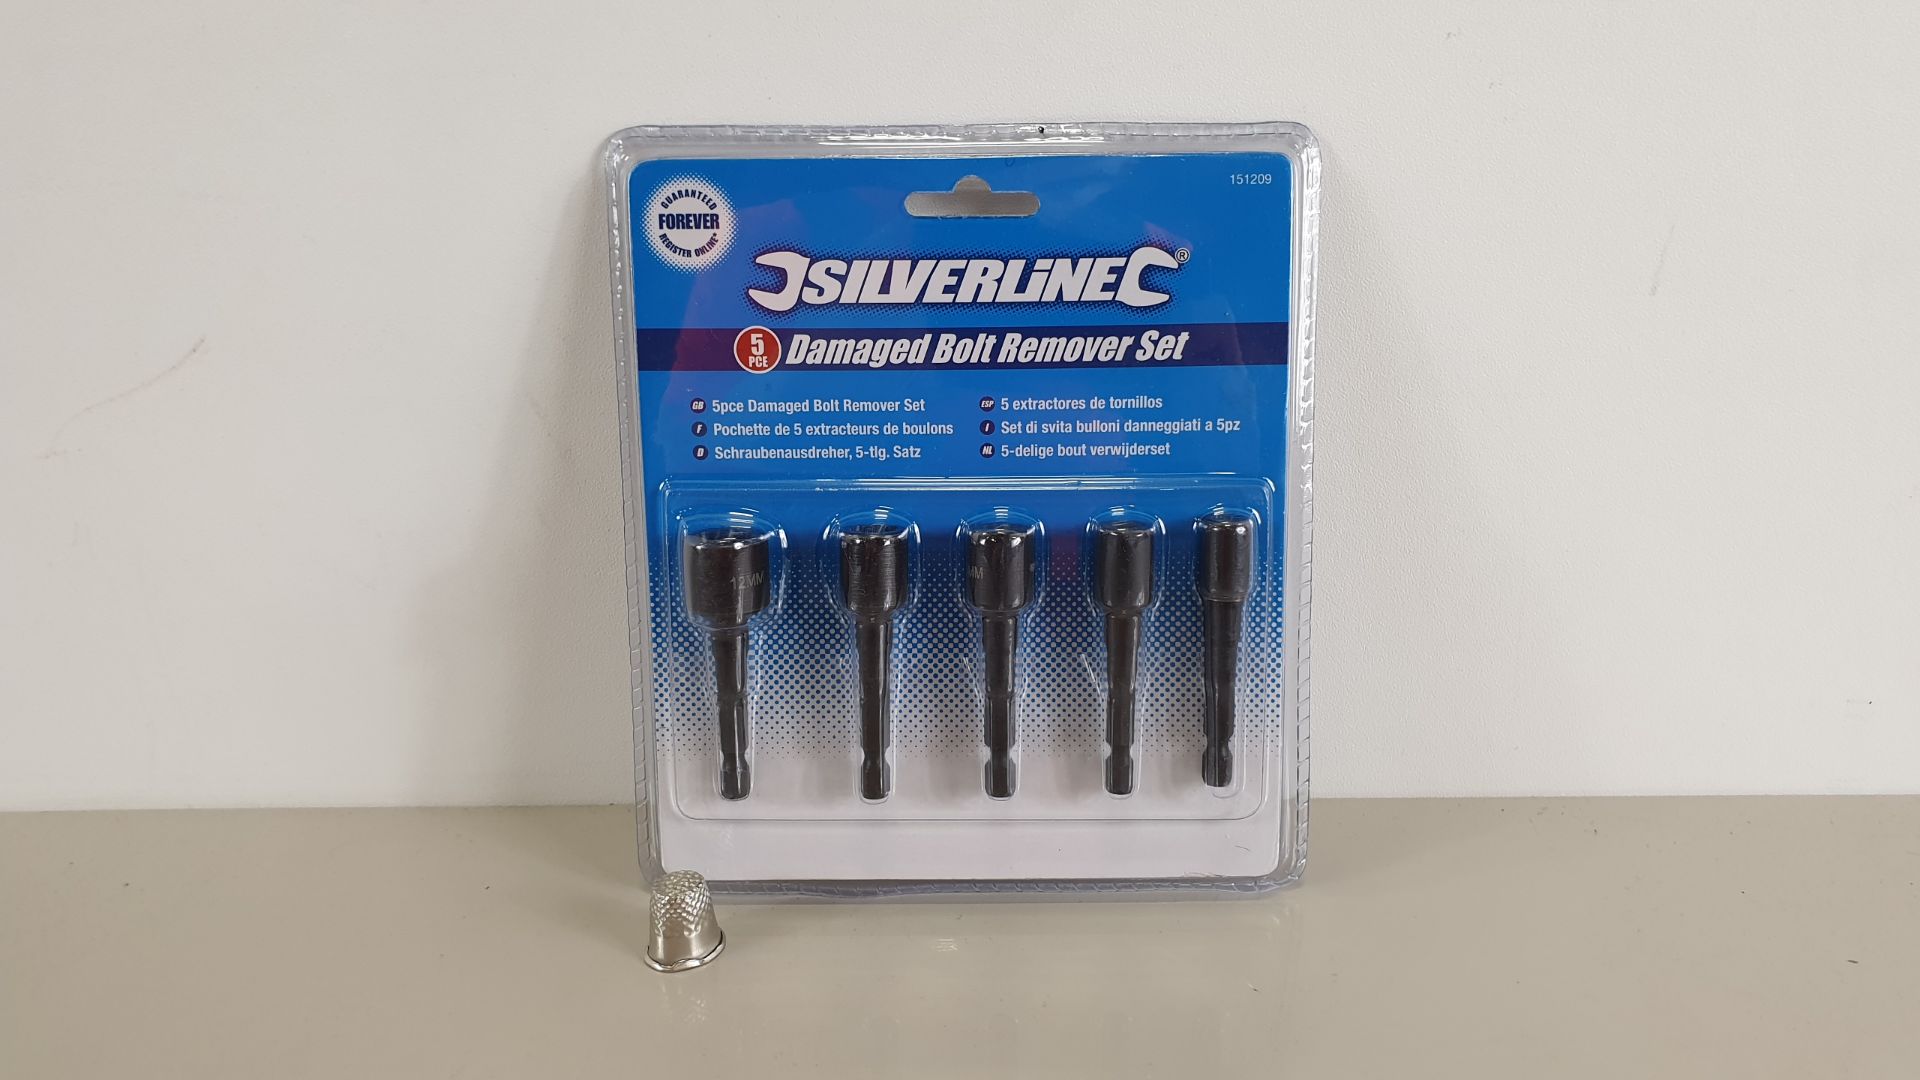 40 X BRAND NEW SILVERLINE 5PC DAMAGED BOLT REMOVER SETS IN 2 BOXES